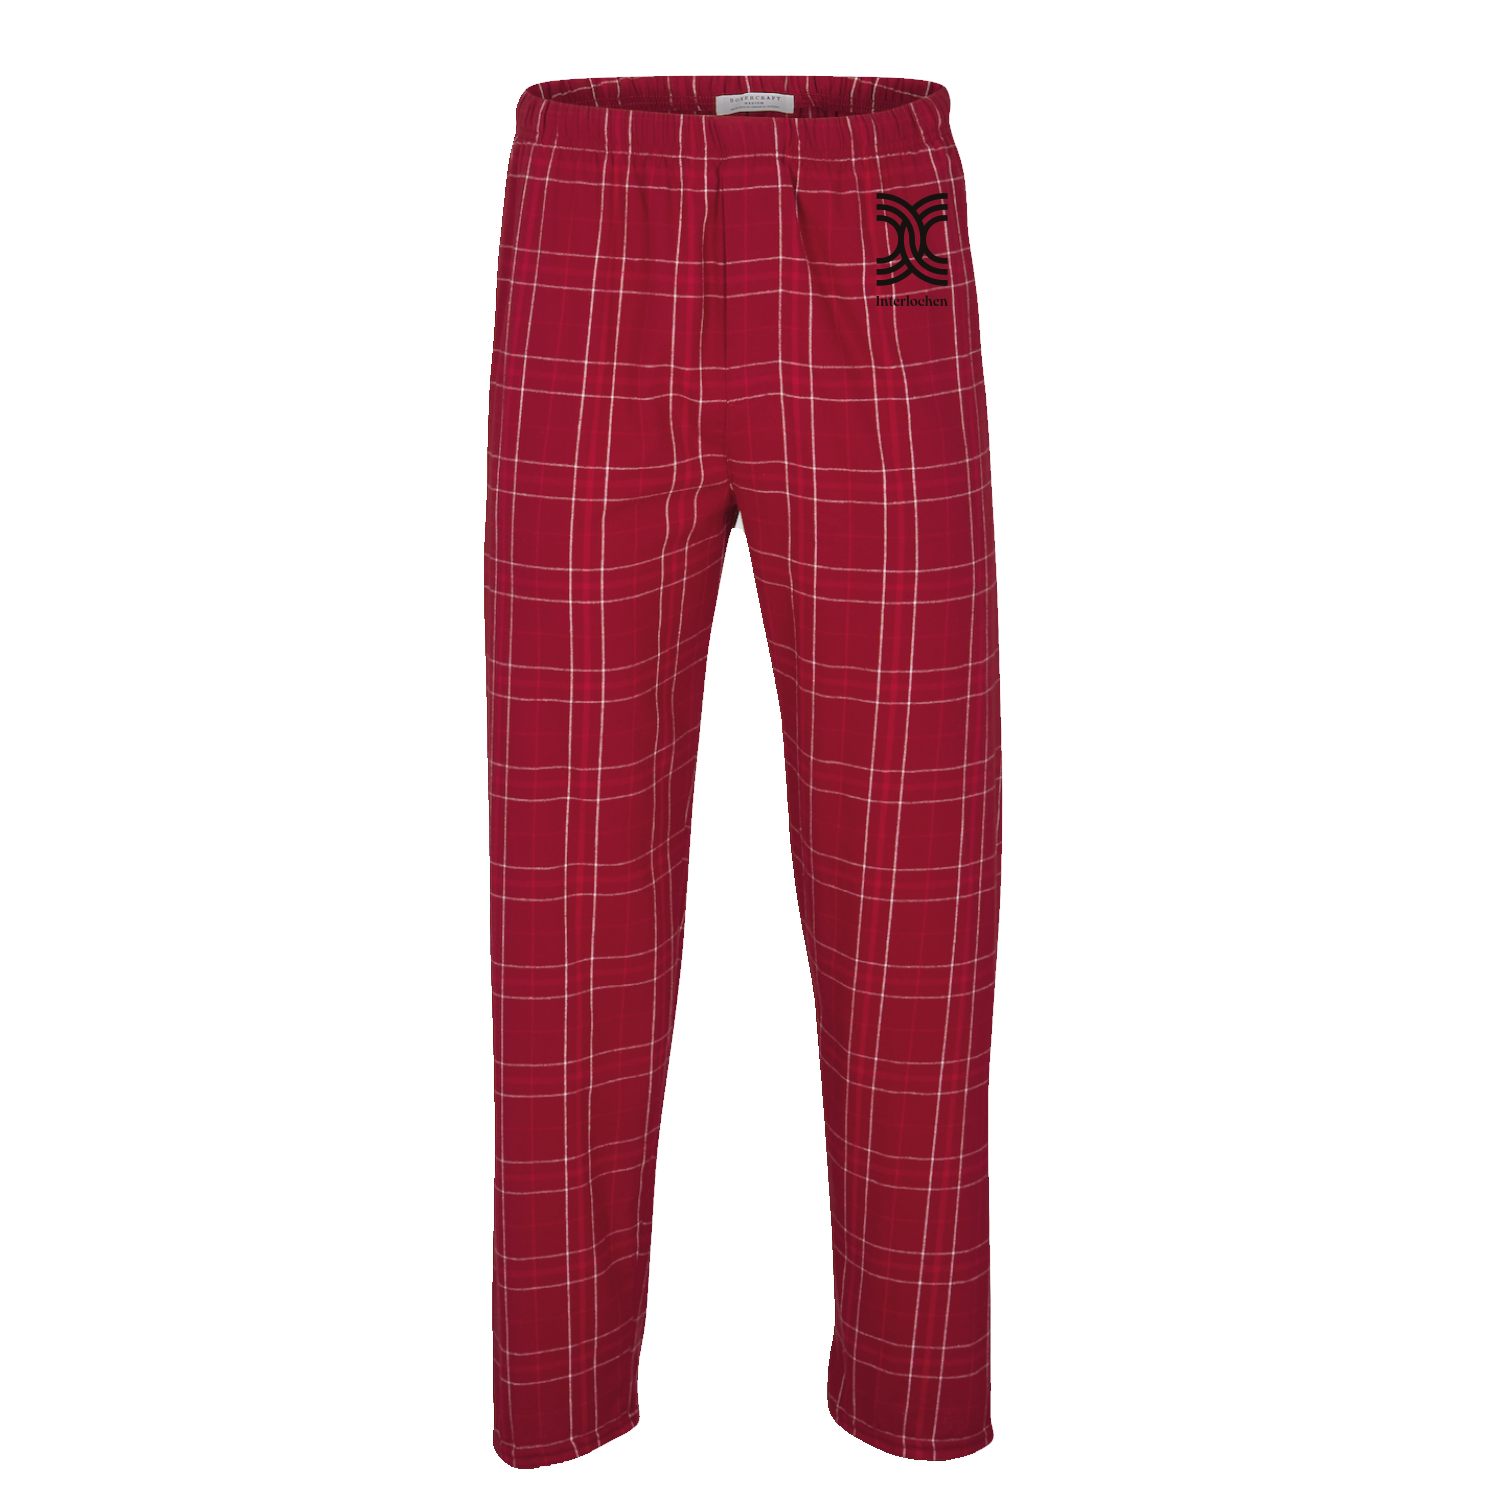 Boxercraft Flannel Pants with Pockets in Classic Red/Black